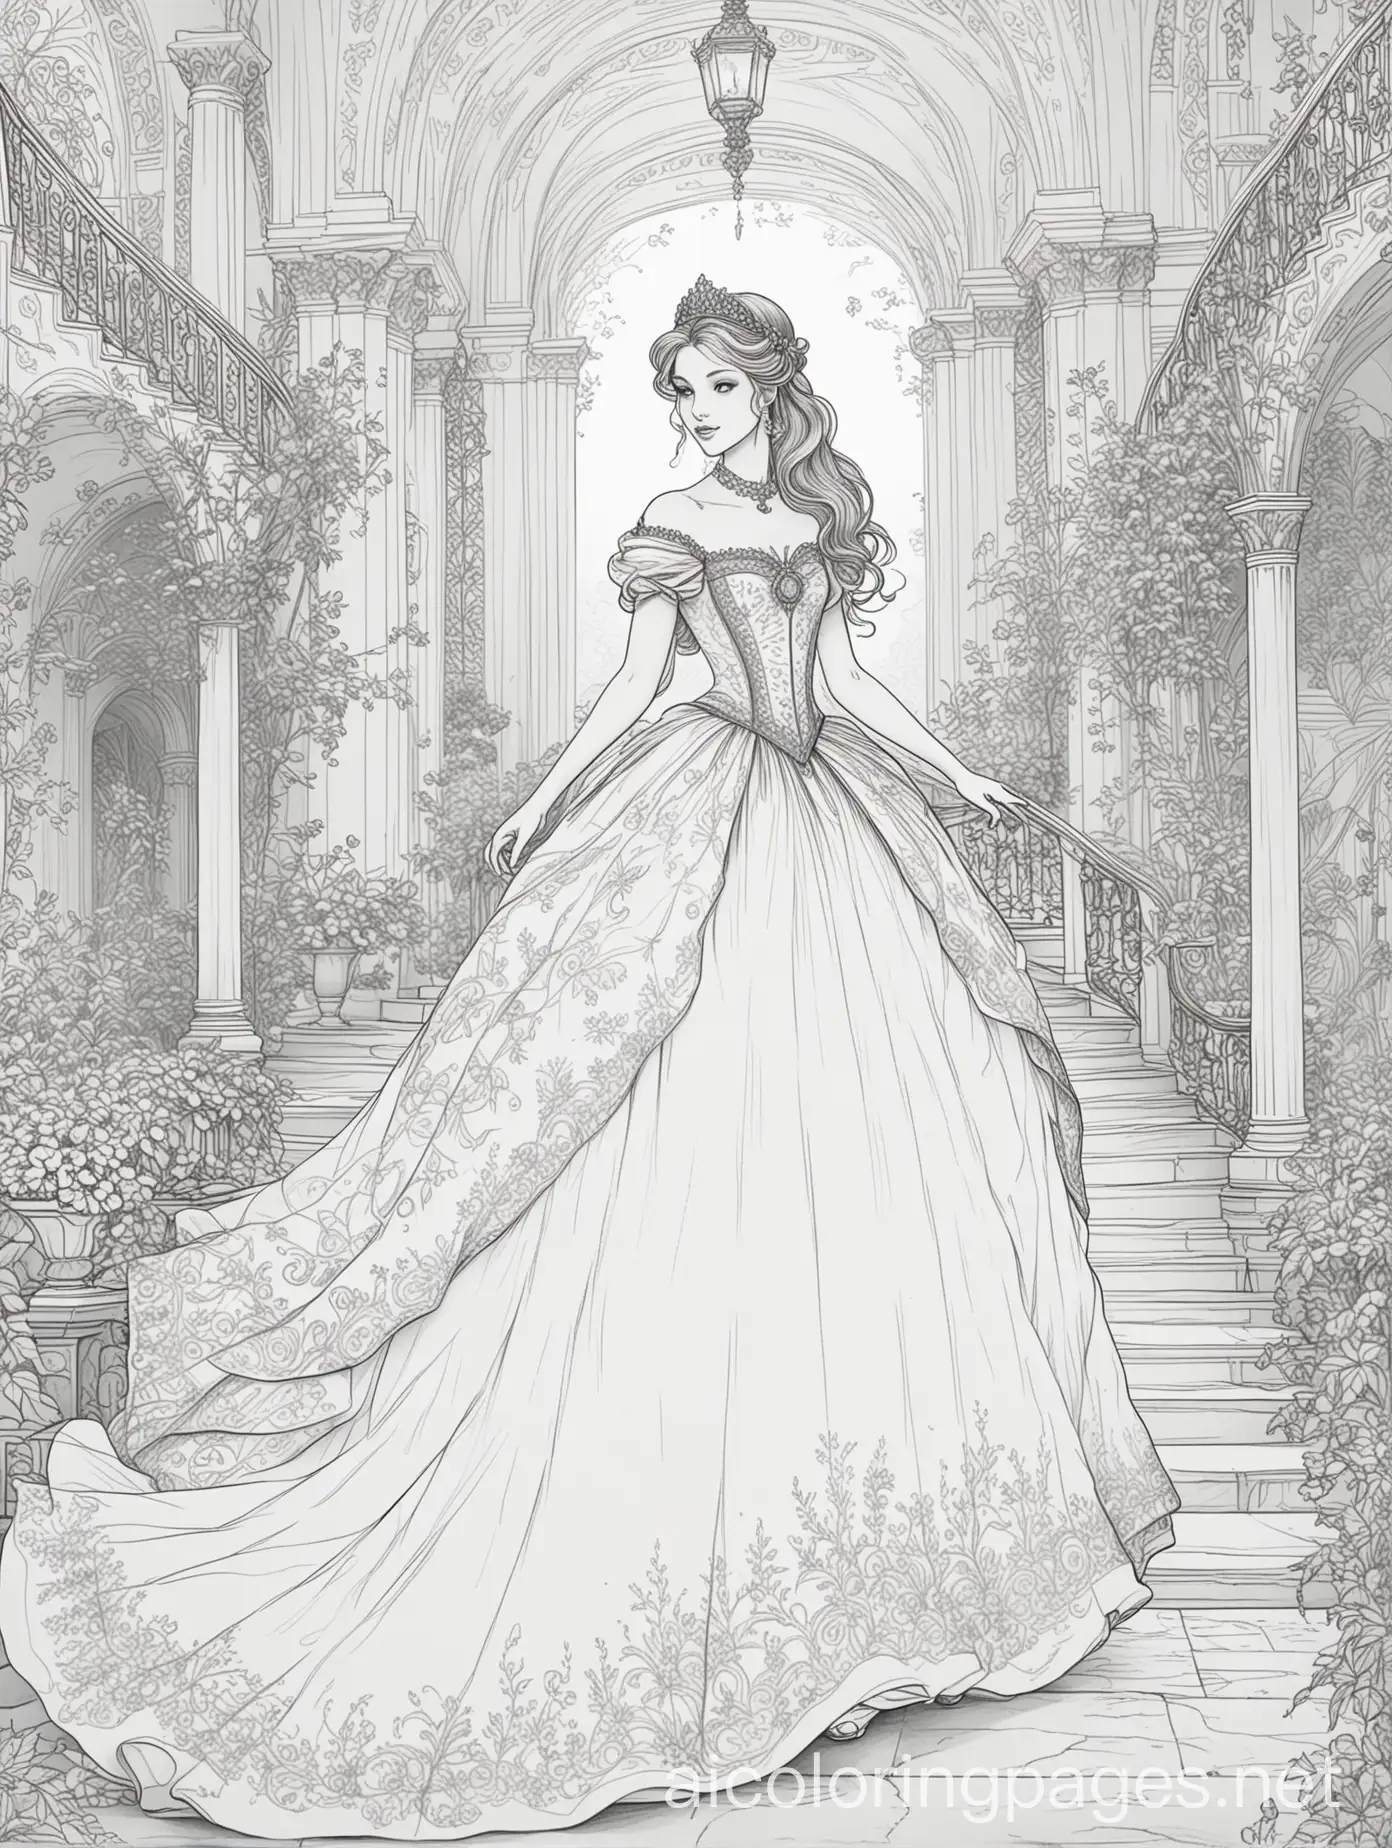 A fairy-tale princess who was invited to a ball at the palace by a prince, Coloring Page, black and white, line art, white background, Simplicity, Ample White Space. The background of the coloring page is plain white to make it easy for young children to color within the lines. The outlines of all the subjects are easy to distinguish, making it simple for kids to color without too much difficulty